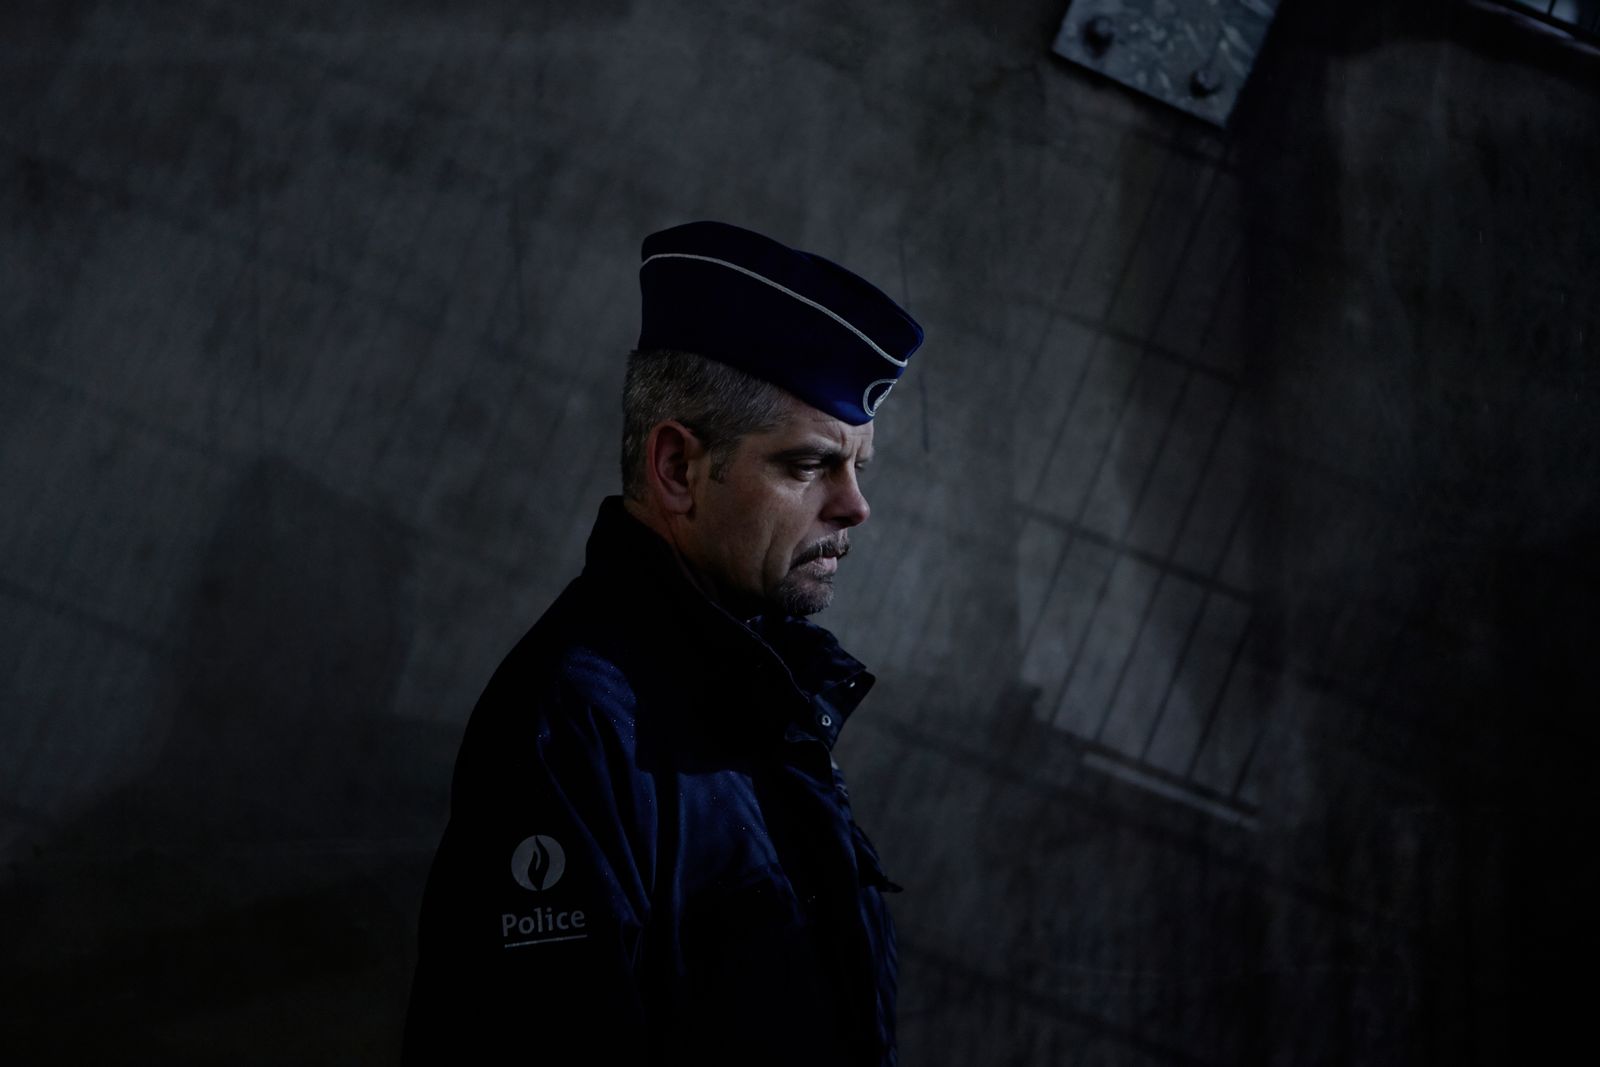 © Giovanni Troilo - One of a thousand police officers of Charleroi.